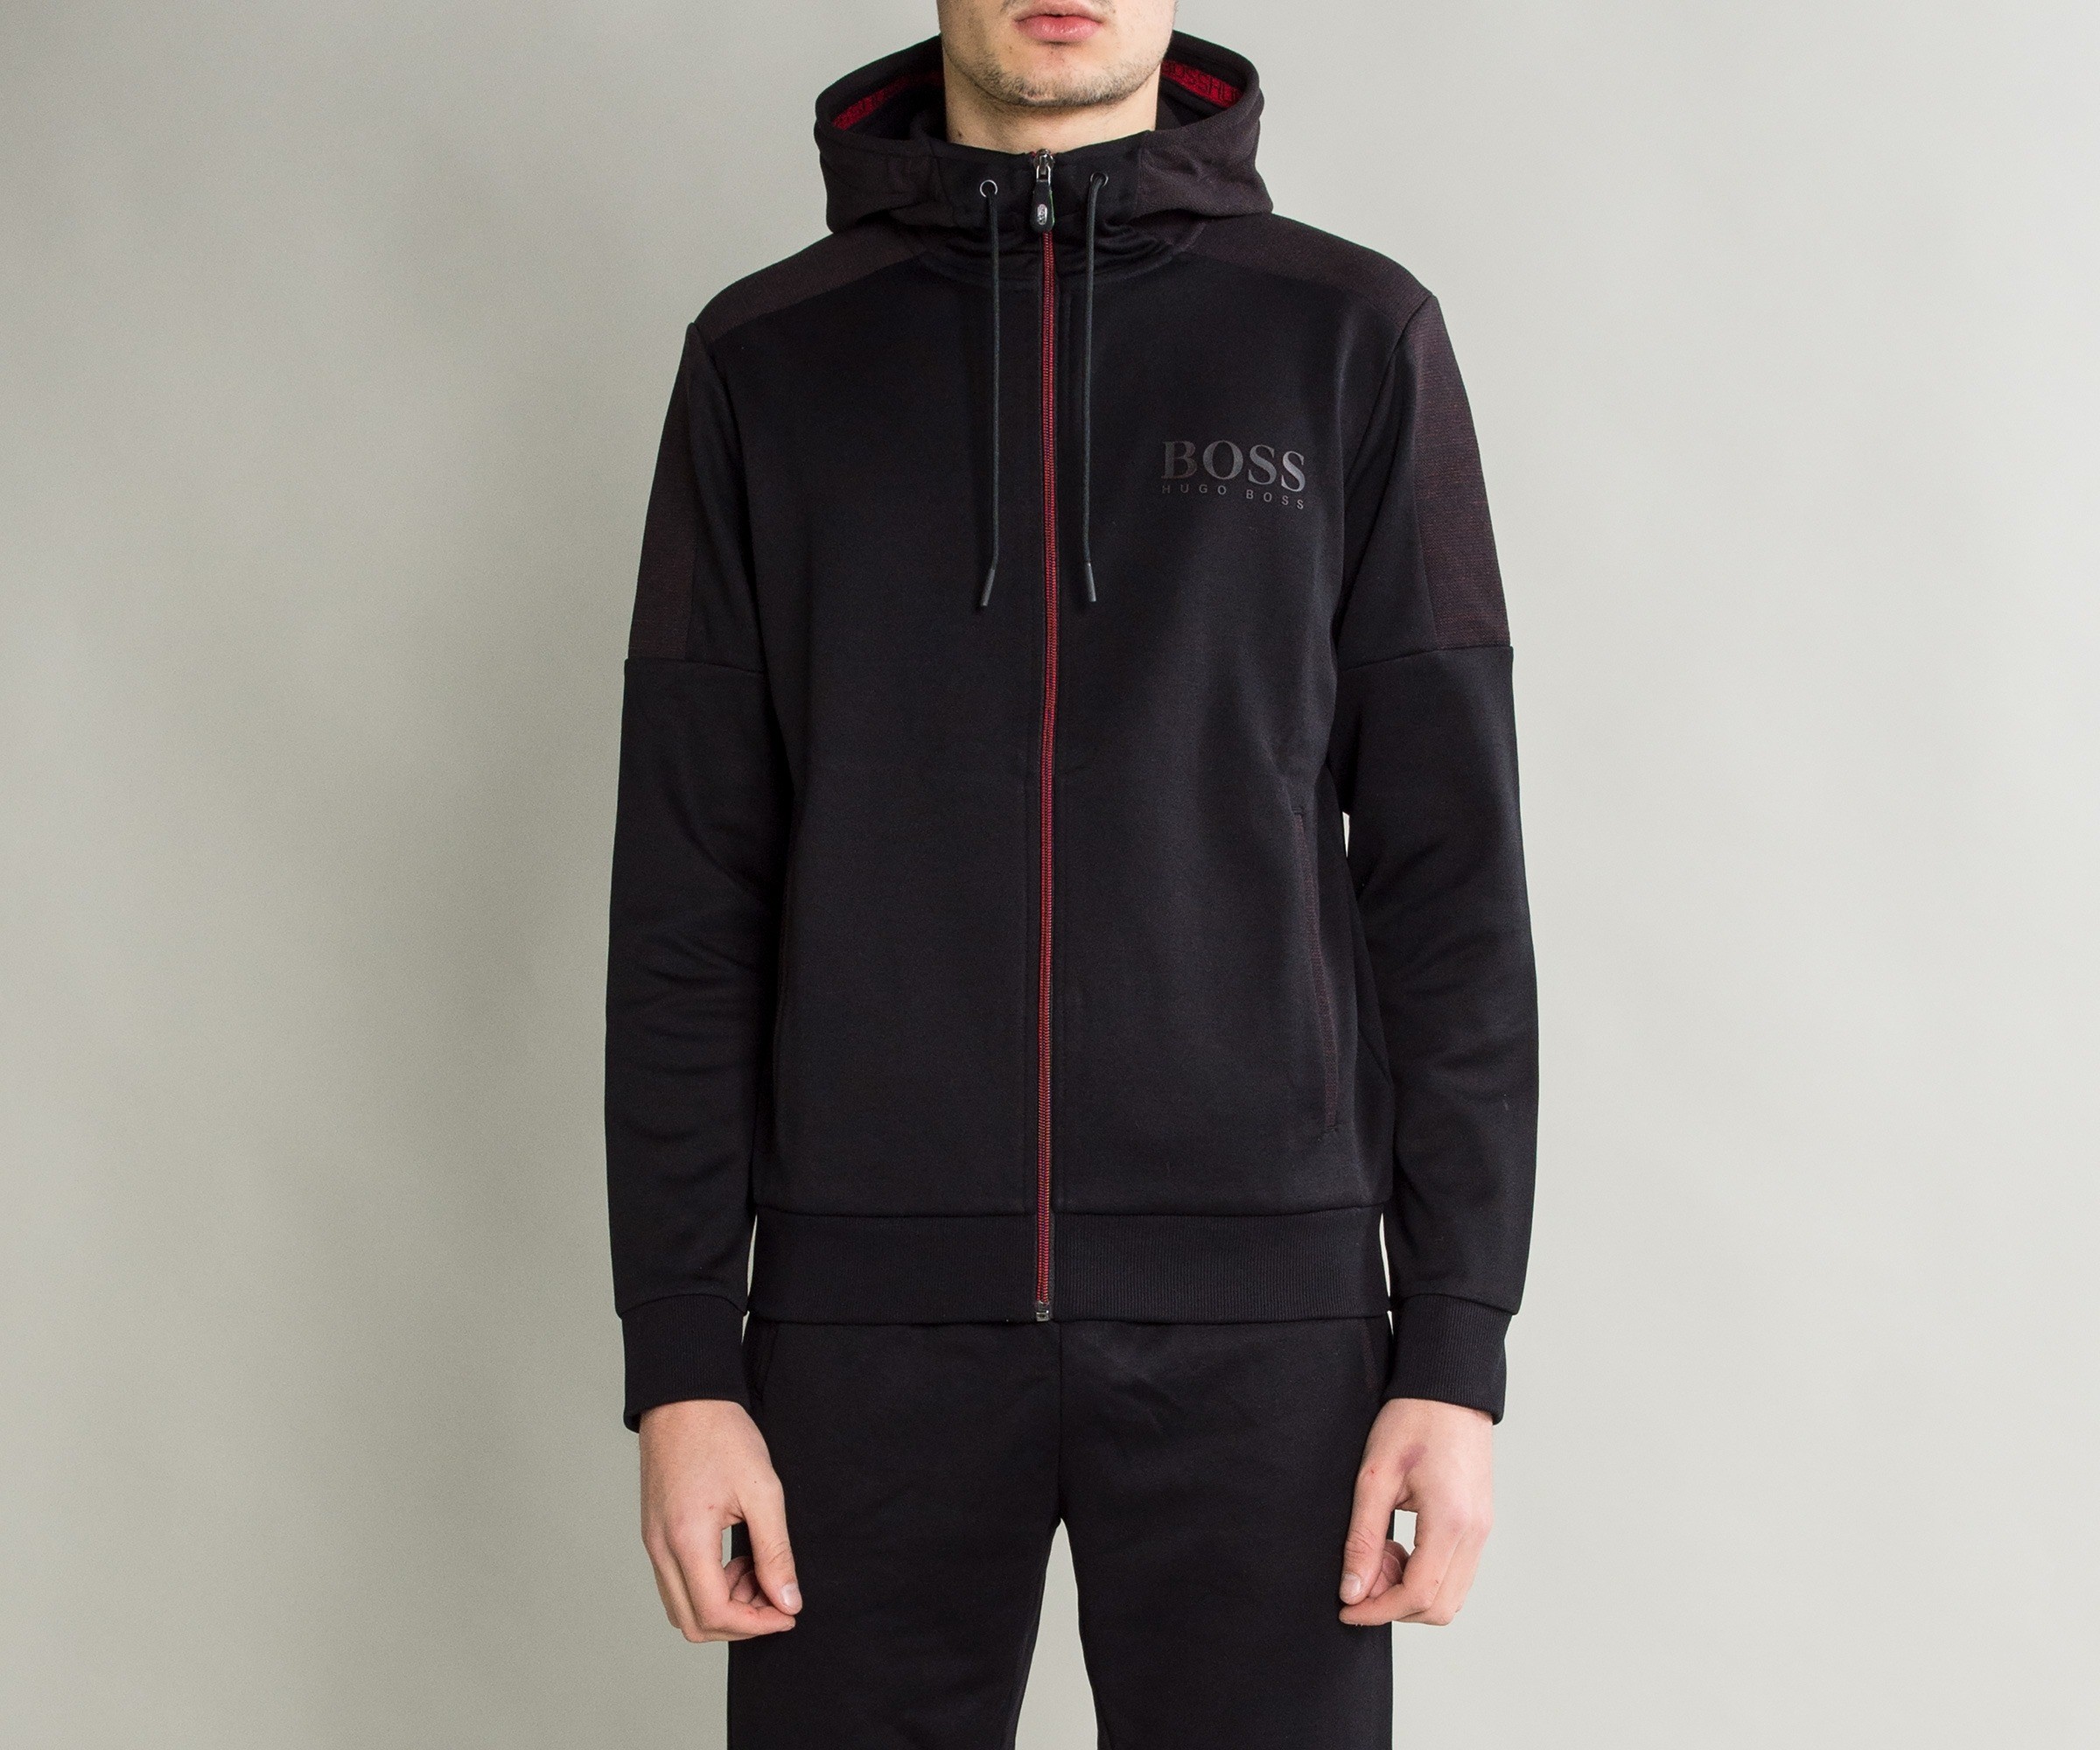 Hugo Boss Green 'Saggy' Hoody with Red Detailing Black